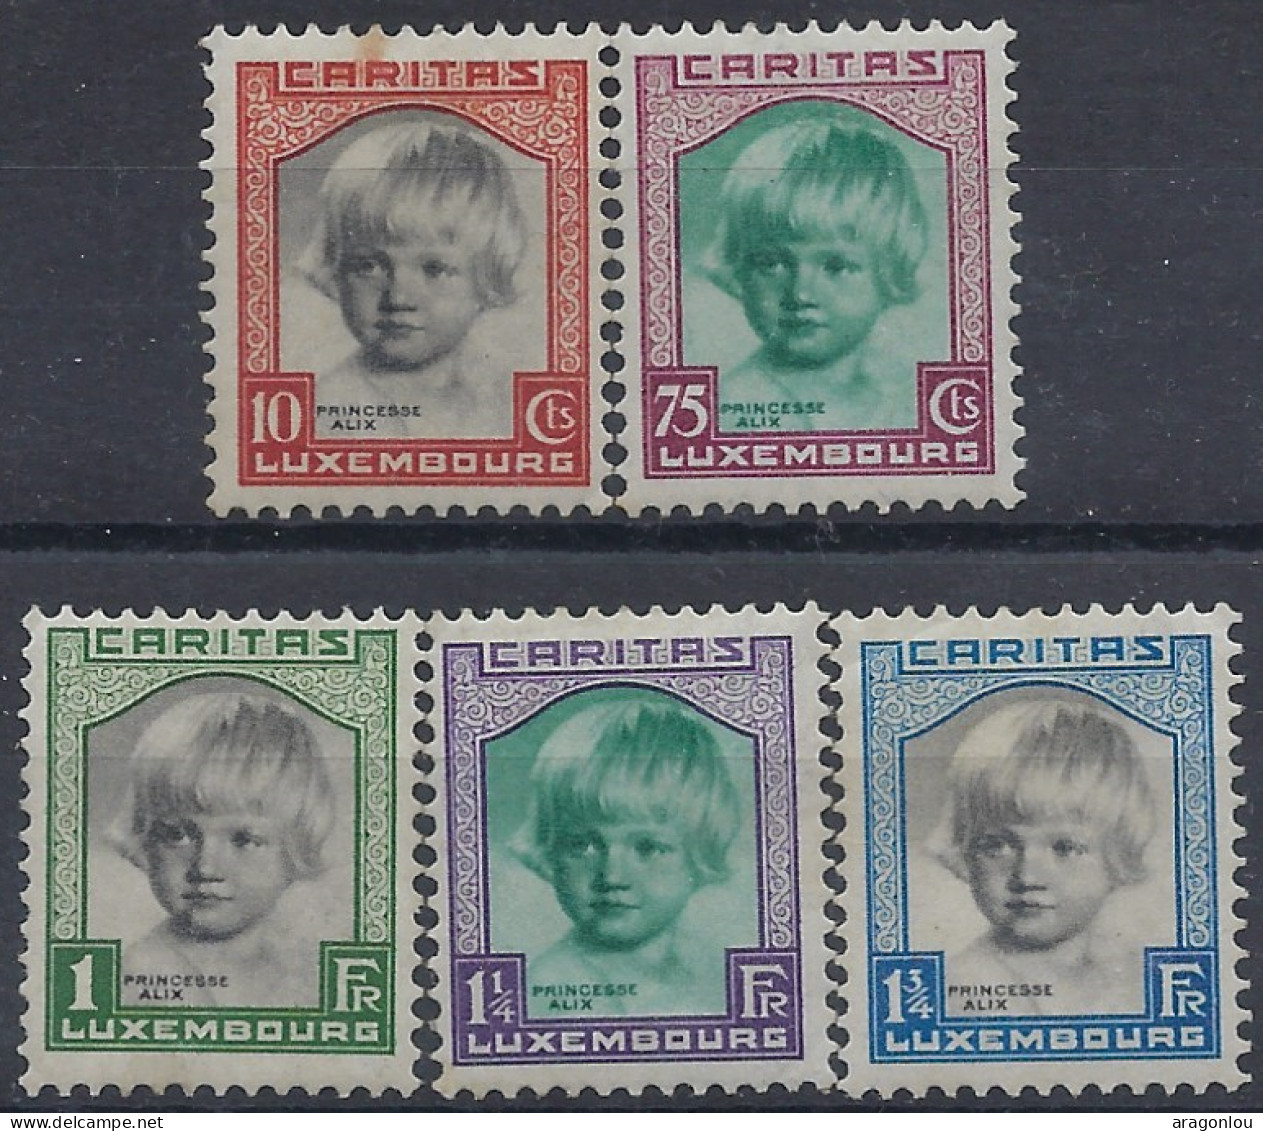 Luxembourg - Luxemburg - Timbres  1931  Série    Princesse Alice    Caritas °   VC.100,- - Used Stamps